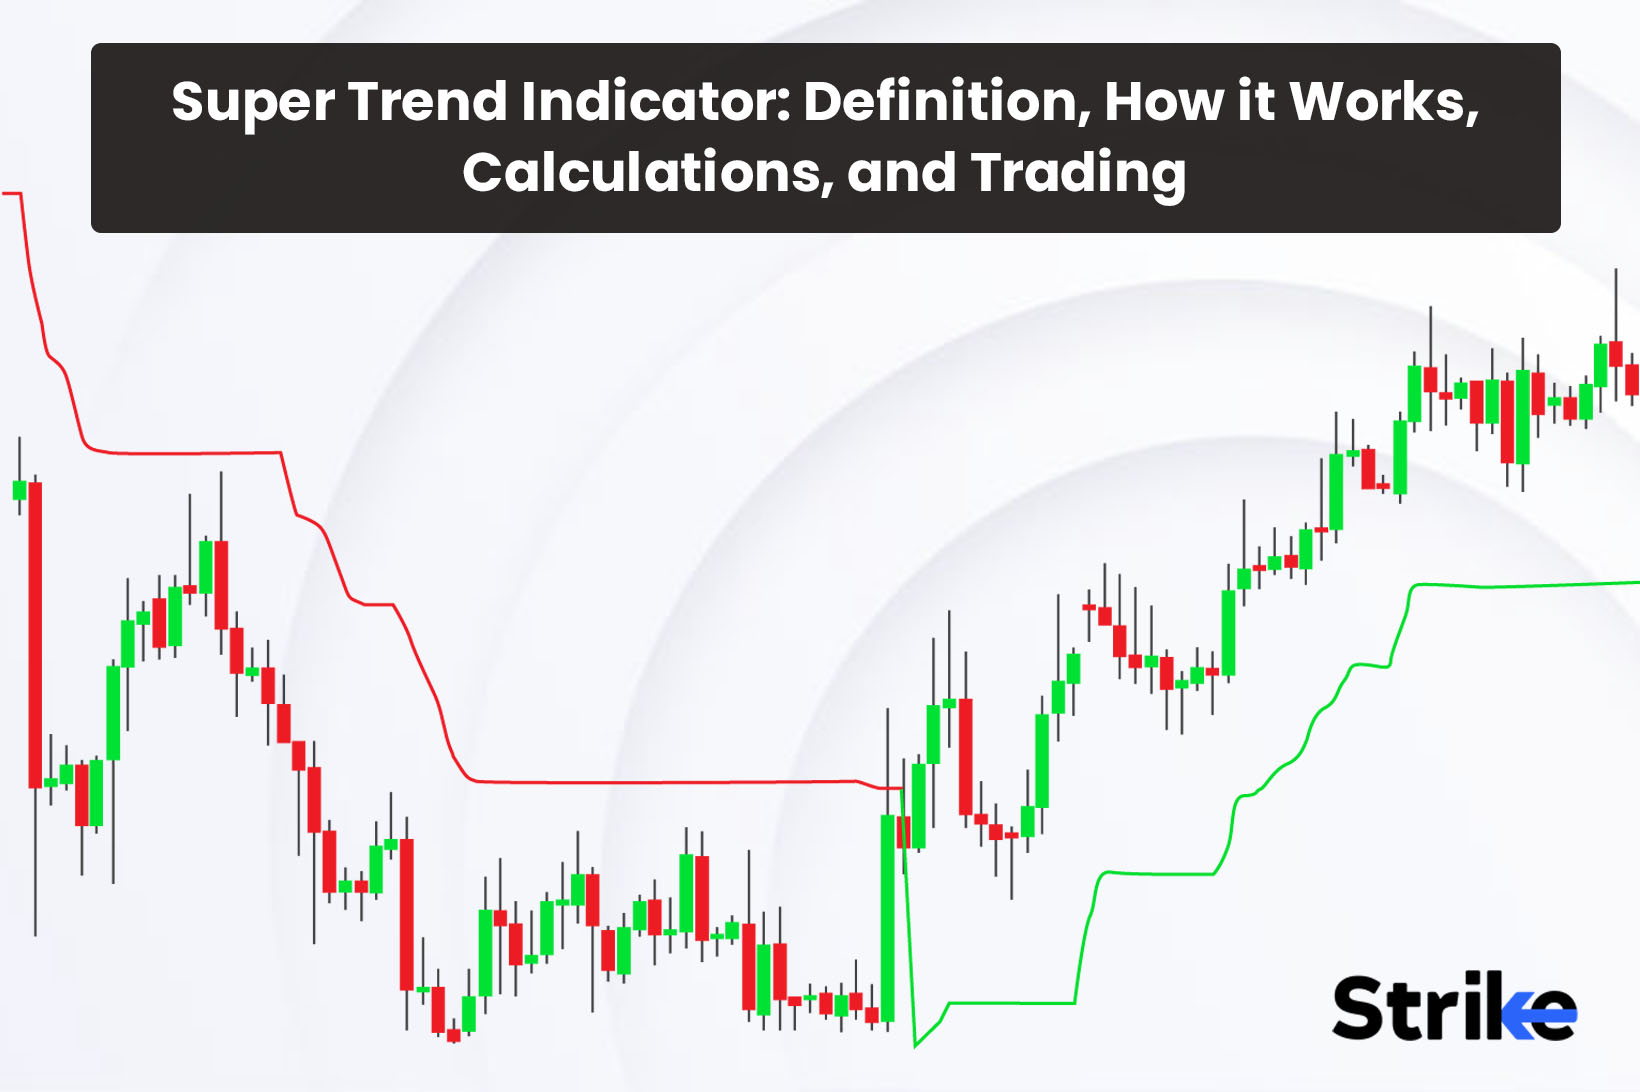 Super Trend Indicator: Definition, How it Works, Calculations, and Trading